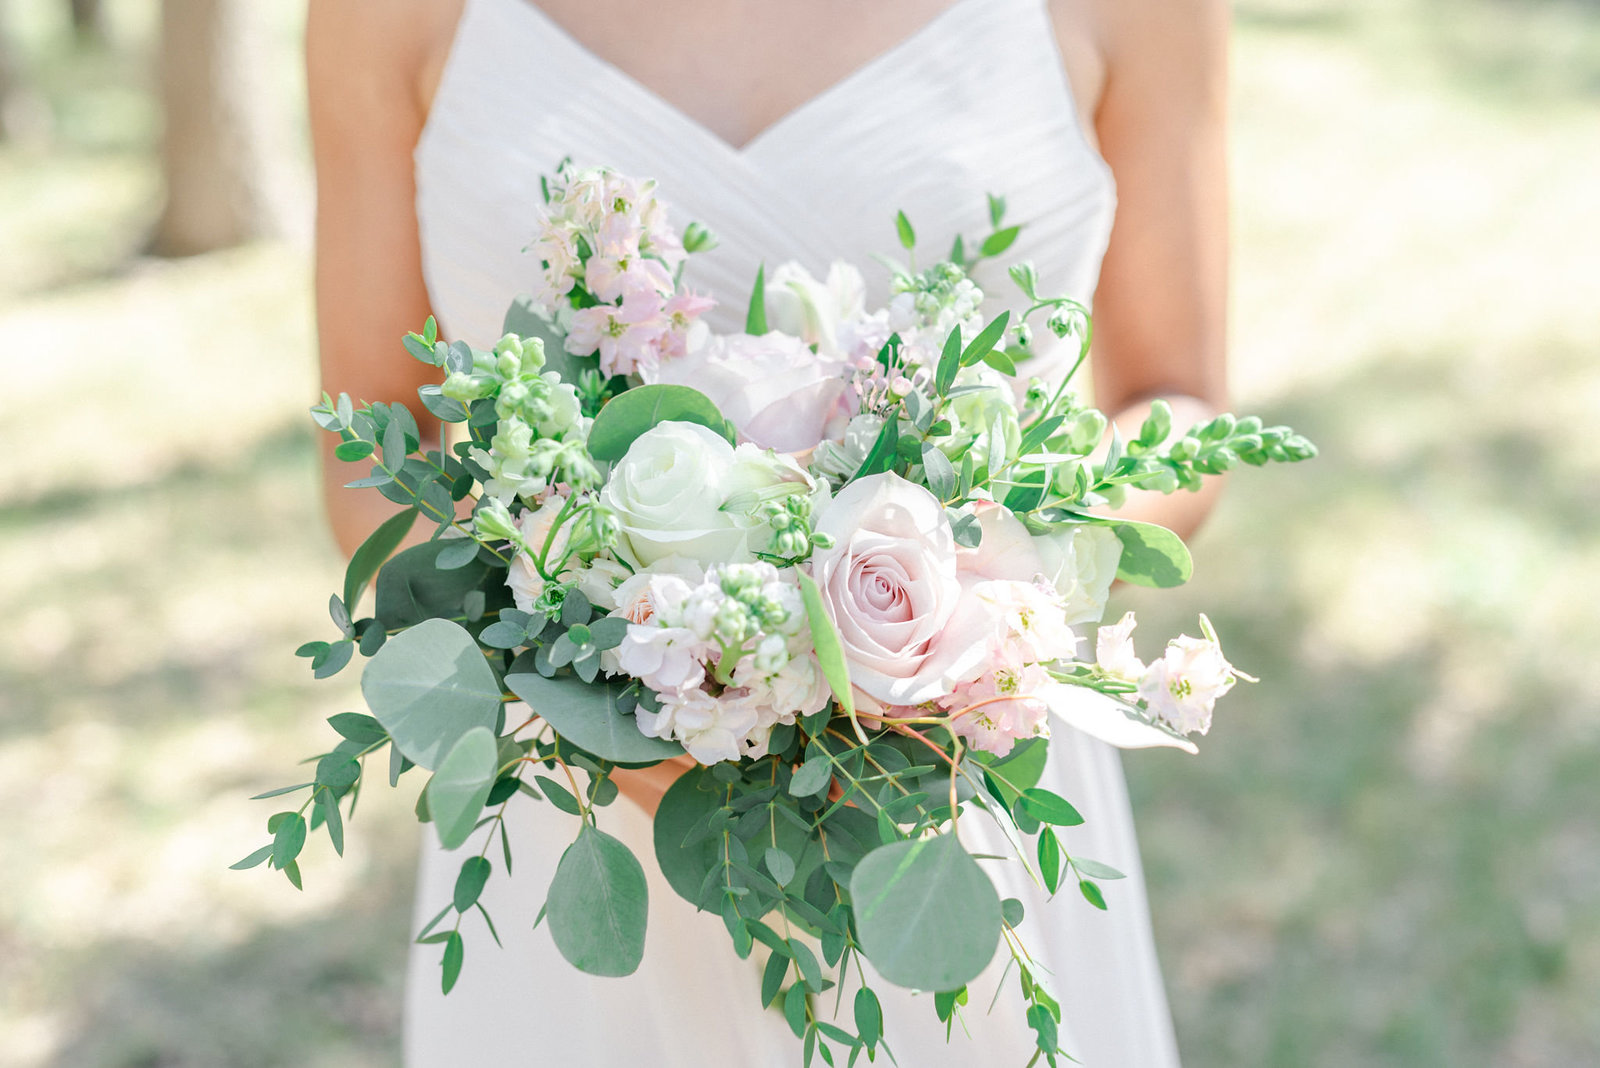 Blush and white unstructured bouquet